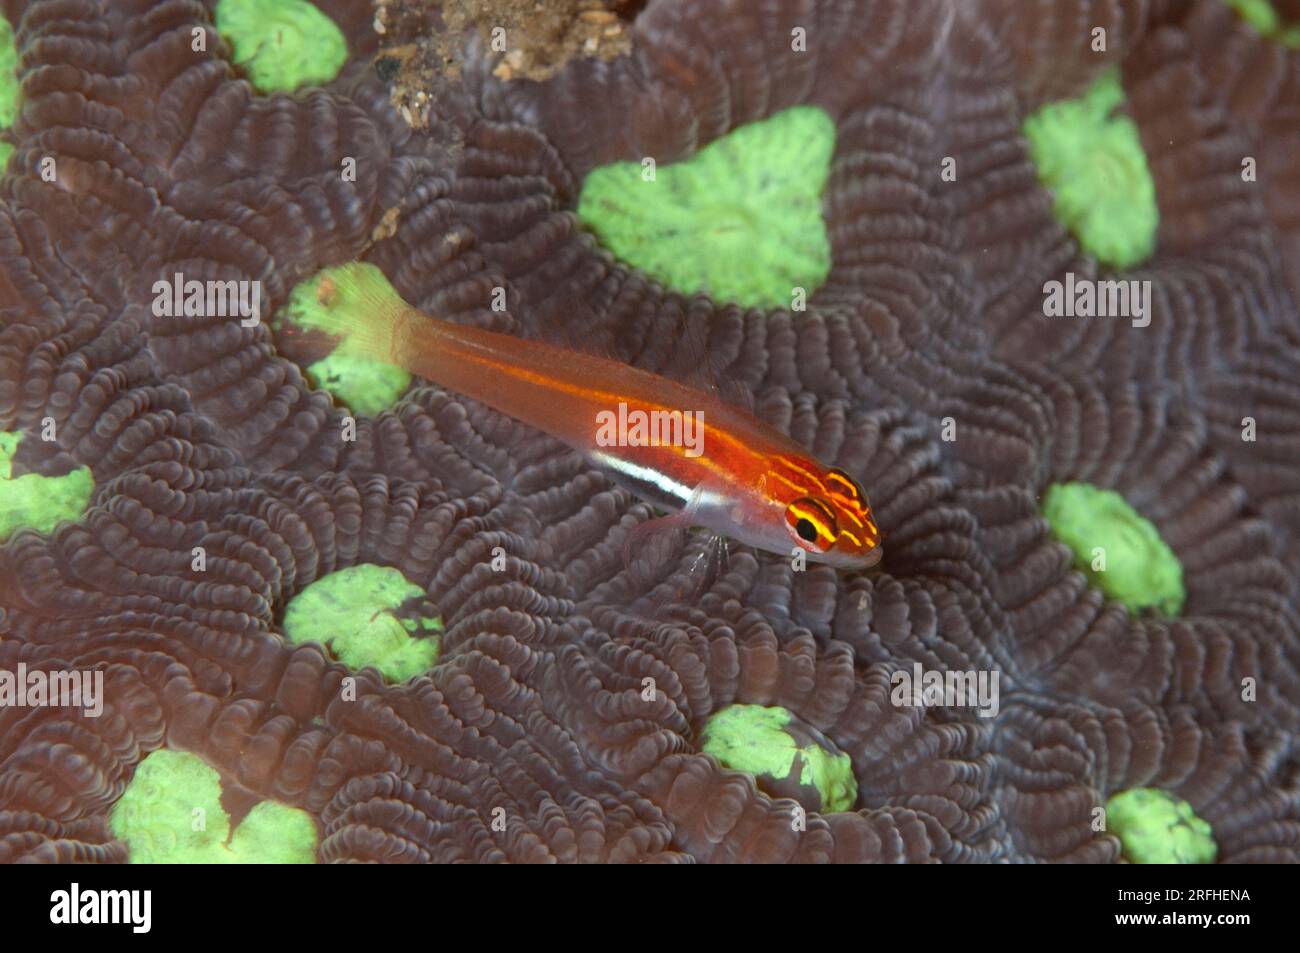 Neon Pygmygoby, Eviota pellucida, on Hard Coral, Scleractinia  Order, calyces, Makawide Wall dive site, Lembeh Straits, Sulawesi, Indonesia Stock Photo